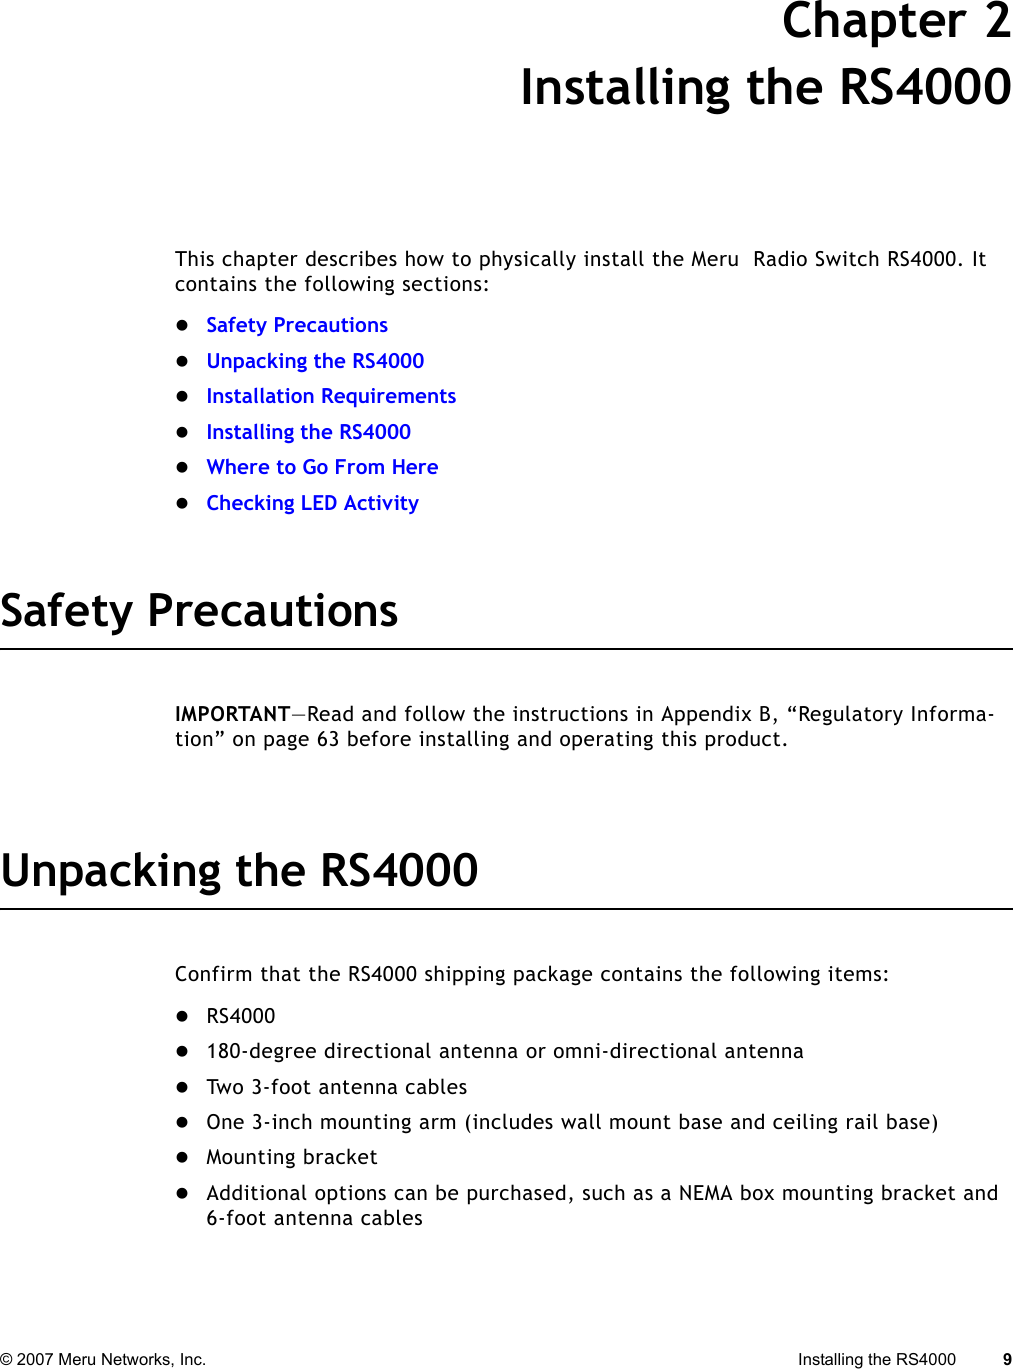 © 2007 Meru Networks, Inc. Installing the RS4000 9 Chapter 2Installing the RS4000This chapter describes how to physically install the Meru  Radio Switch RS4000. It contains the following sections:zSafety PrecautionszUnpacking the RS4000zInstallation RequirementszInstalling the RS4000zWhere to Go From HerezChecking LED ActivitySafety PrecautionsIMPORTANT—Read and follow the instructions in Appendix B, “Regulatory Informa-tion” on page 63 before installing and operating this product.Unpacking the RS4000Confirm that the RS4000 shipping package contains the following items:zRS4000 z180-degree directional antenna or omni-directional antenna zTwo 3-foot antenna cables zOne 3-inch mounting arm (includes wall mount base and ceiling rail base)zMounting bracket zAdditional options can be purchased, such as a NEMA box mounting bracket and 6-foot antenna cables